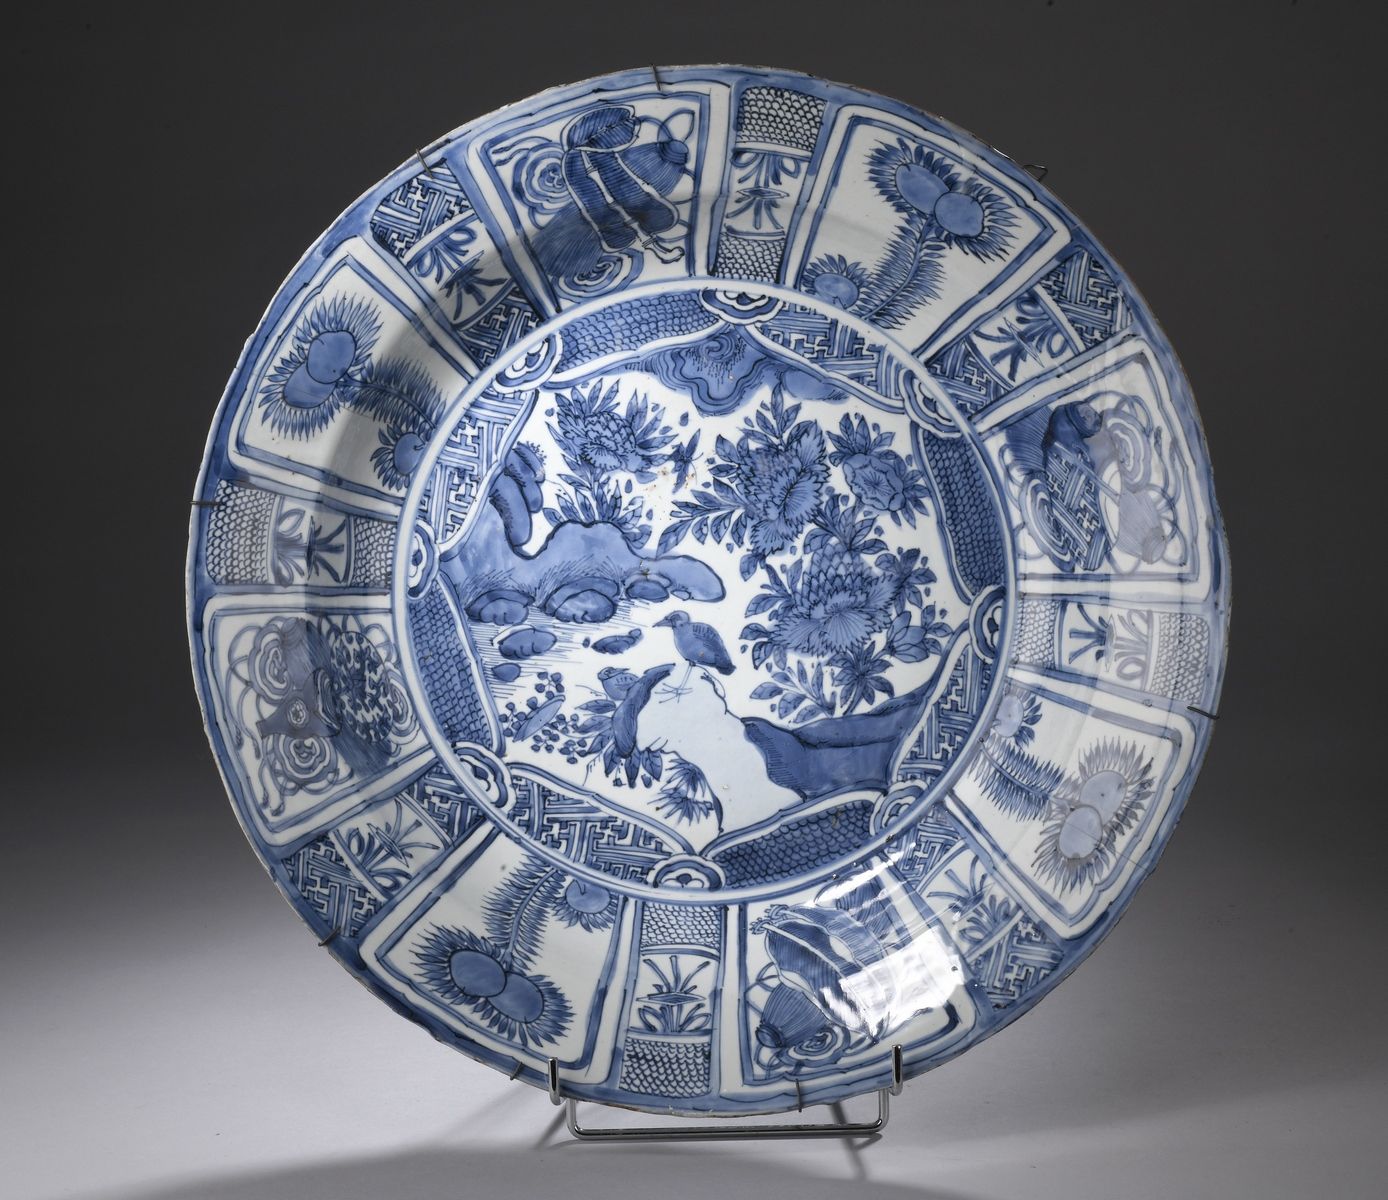 Null CHINA, Kraak - WANLI period (1572 - 1620)
Large porcelain dish decorated in&hellip;